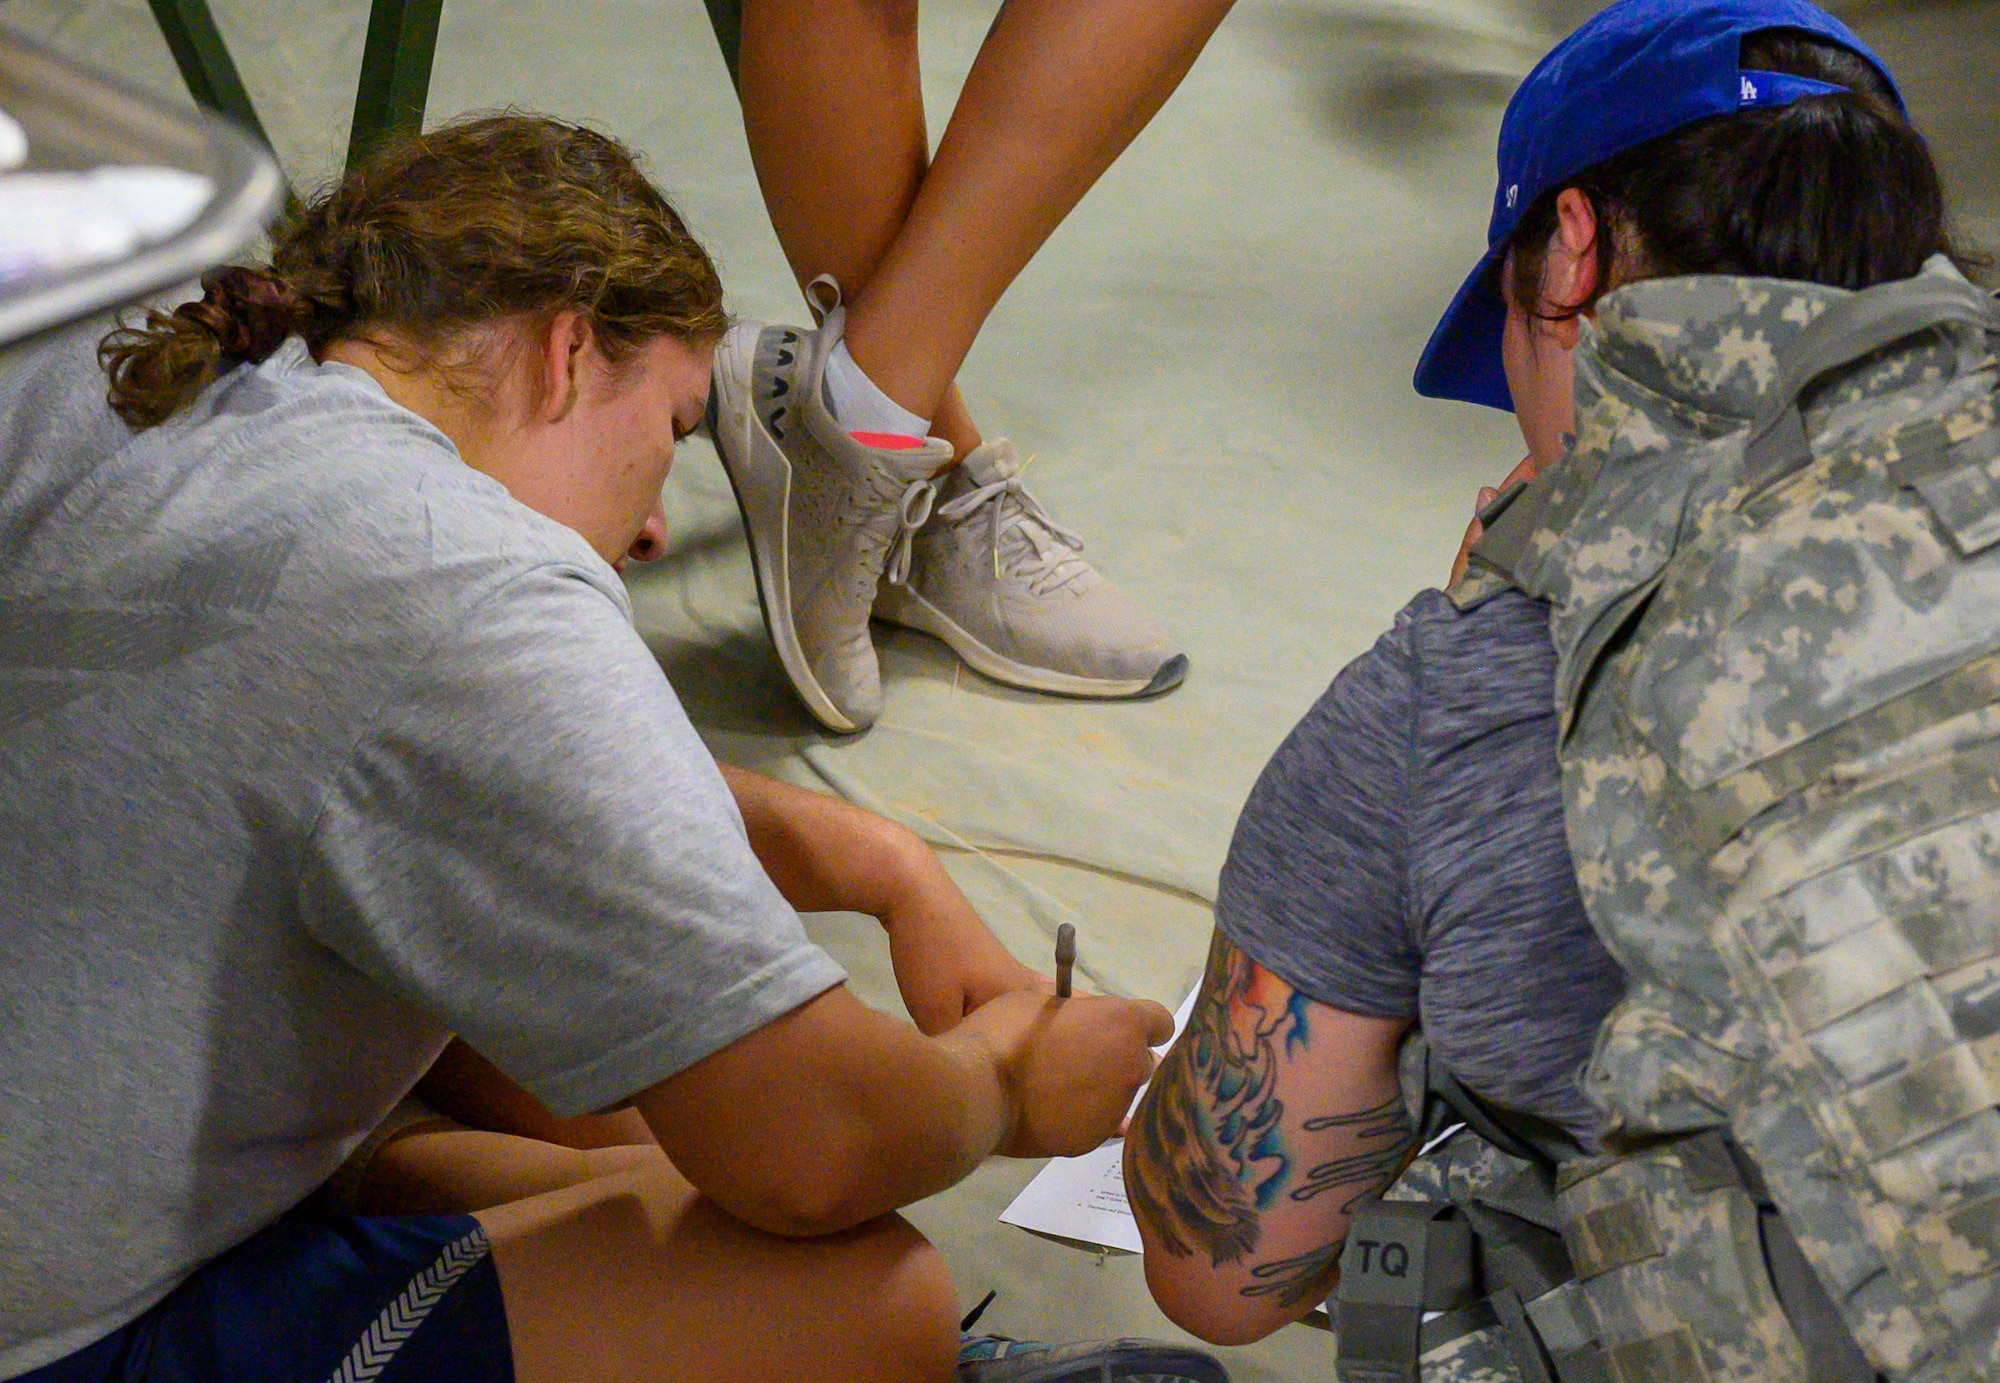 U.S. Air Force Staff Sgt. Susanna Schriever, 378th Expeditionary Medical Squadron medic, and U.S. Air Force Staff Sgt. Kelly Dzitko, 378th Expeditionary Medical Squadron respiratory therapist, complete the written portion of the first best medic competition at Prince Sultan Air Base, June 21, 2021.The competition was a culmination of the past 11 weeks of combat medicine training, testing their ability to provide care in unexpected situations. (U.S. Air Force photo by Senior Airman Samuel Earick)